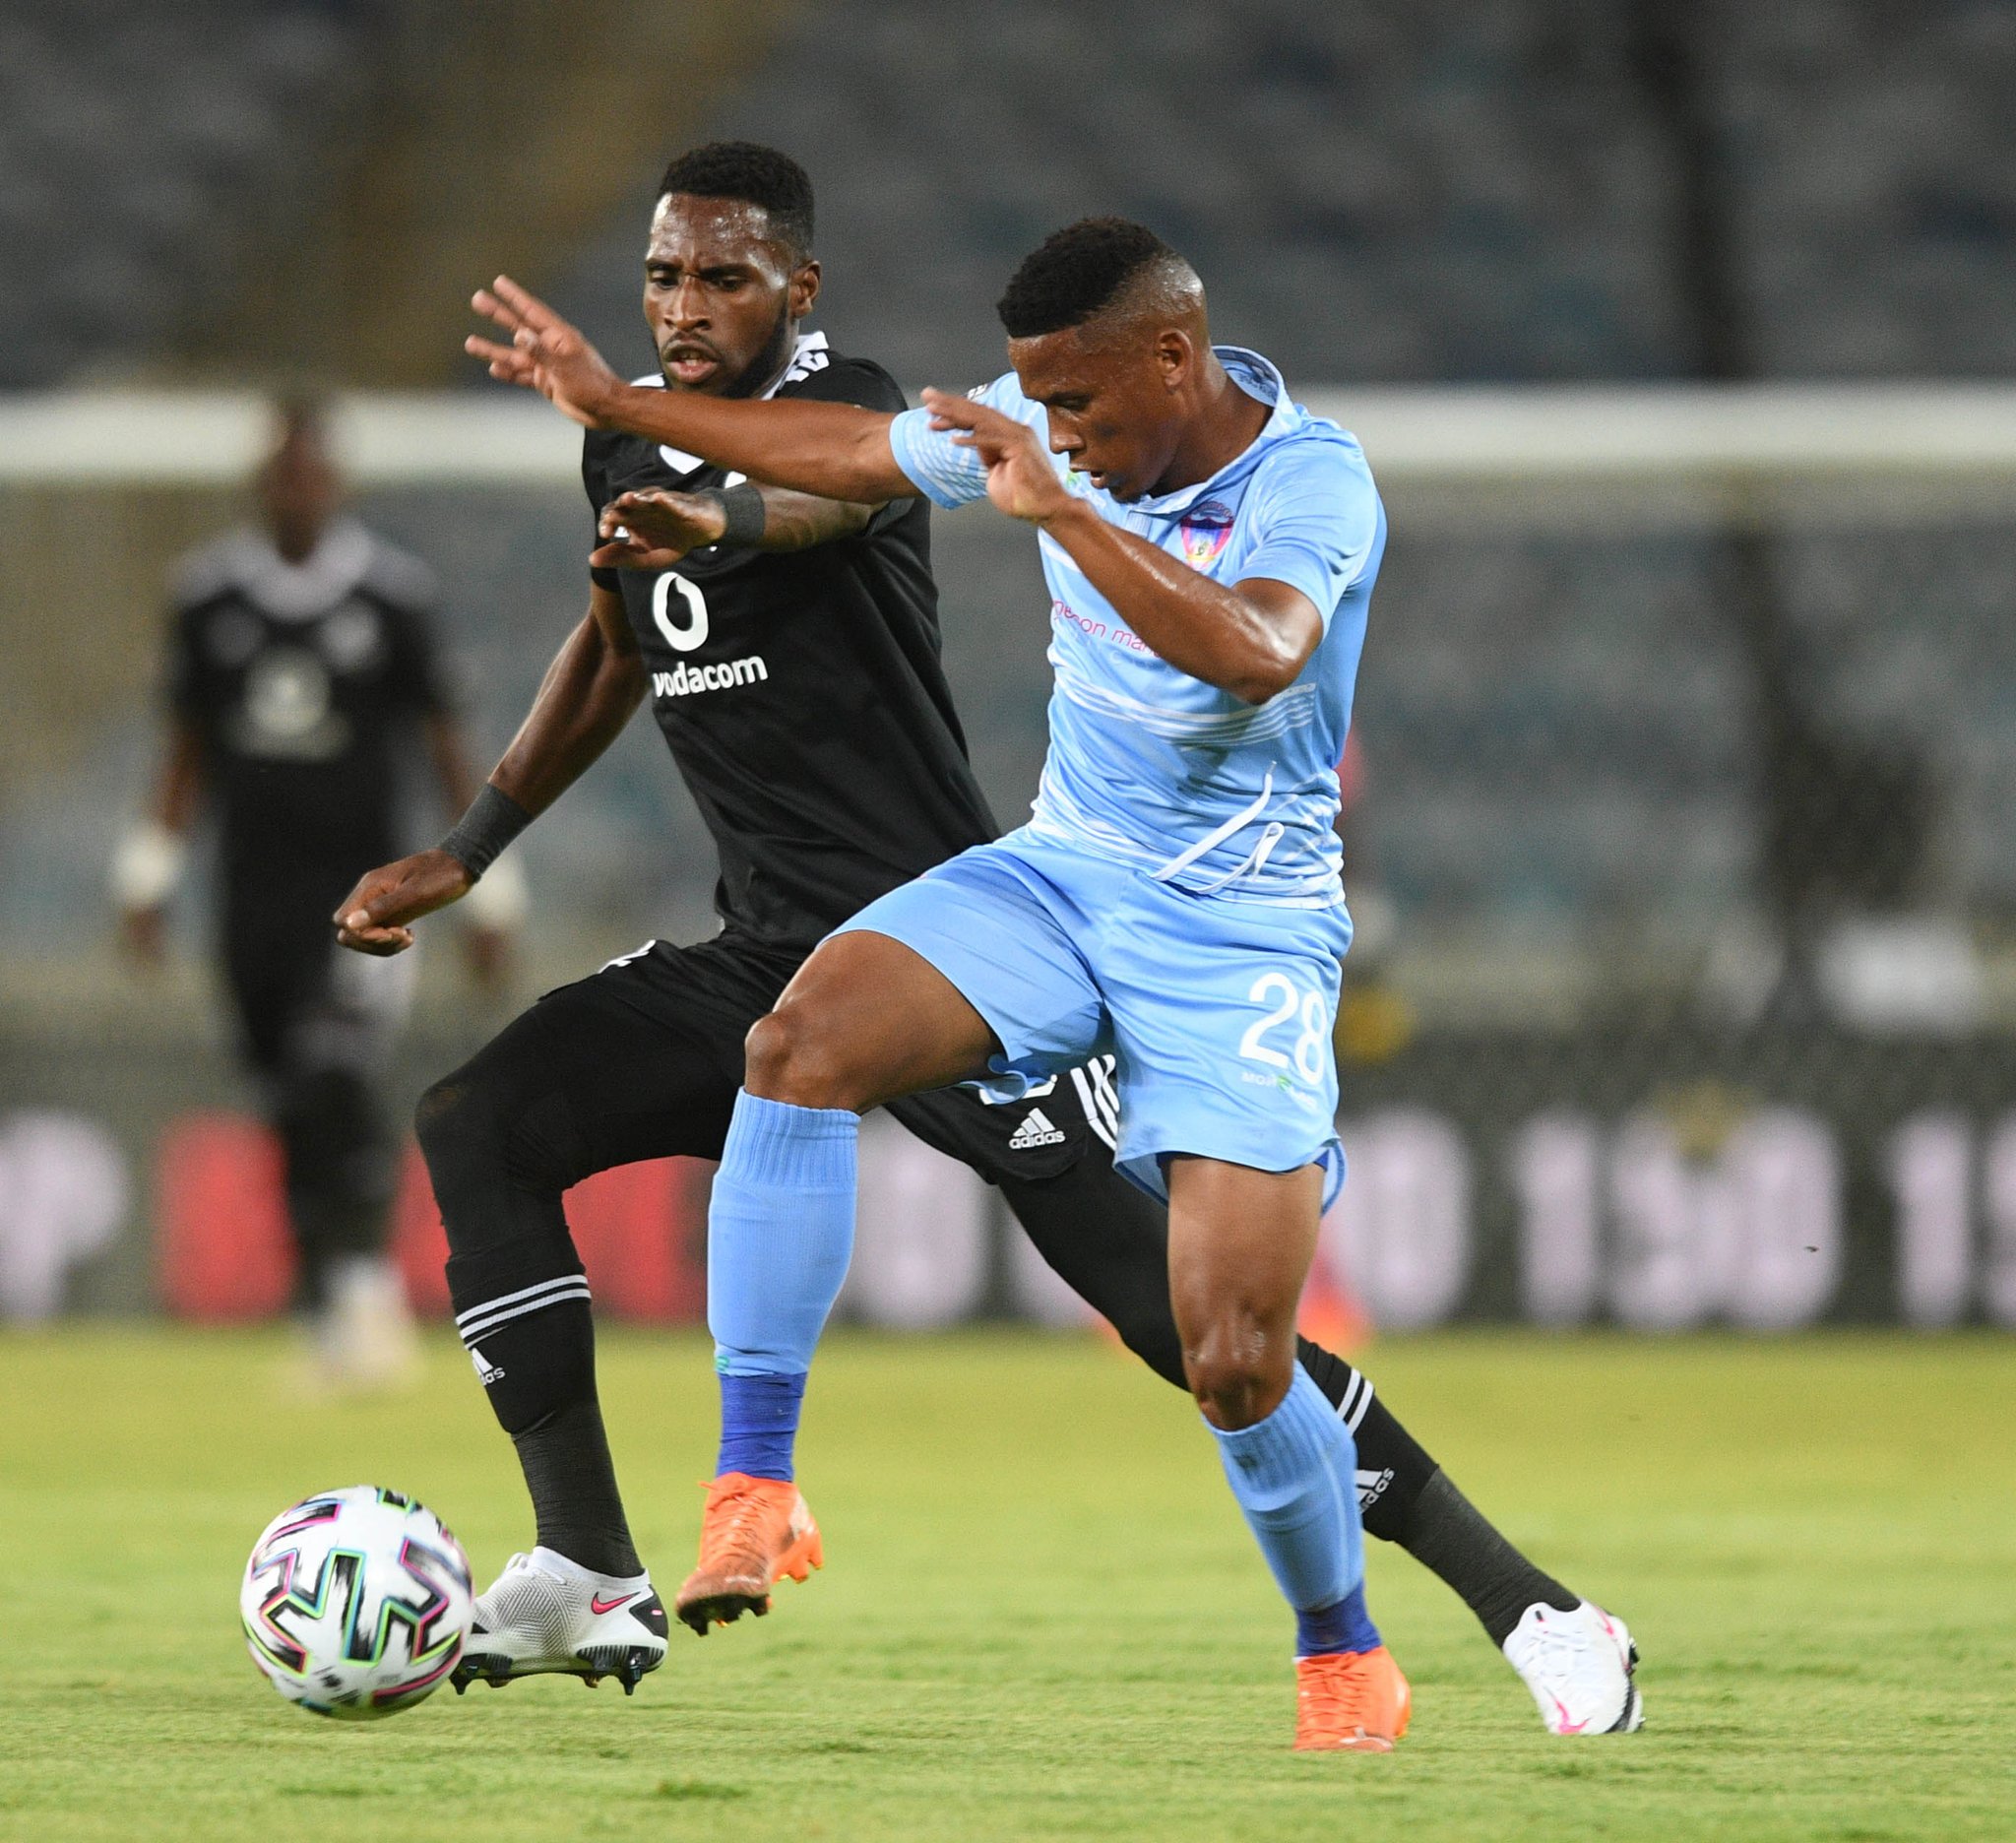 Dstv Premiership full matchday 7 results as Pirates extend unbeaten